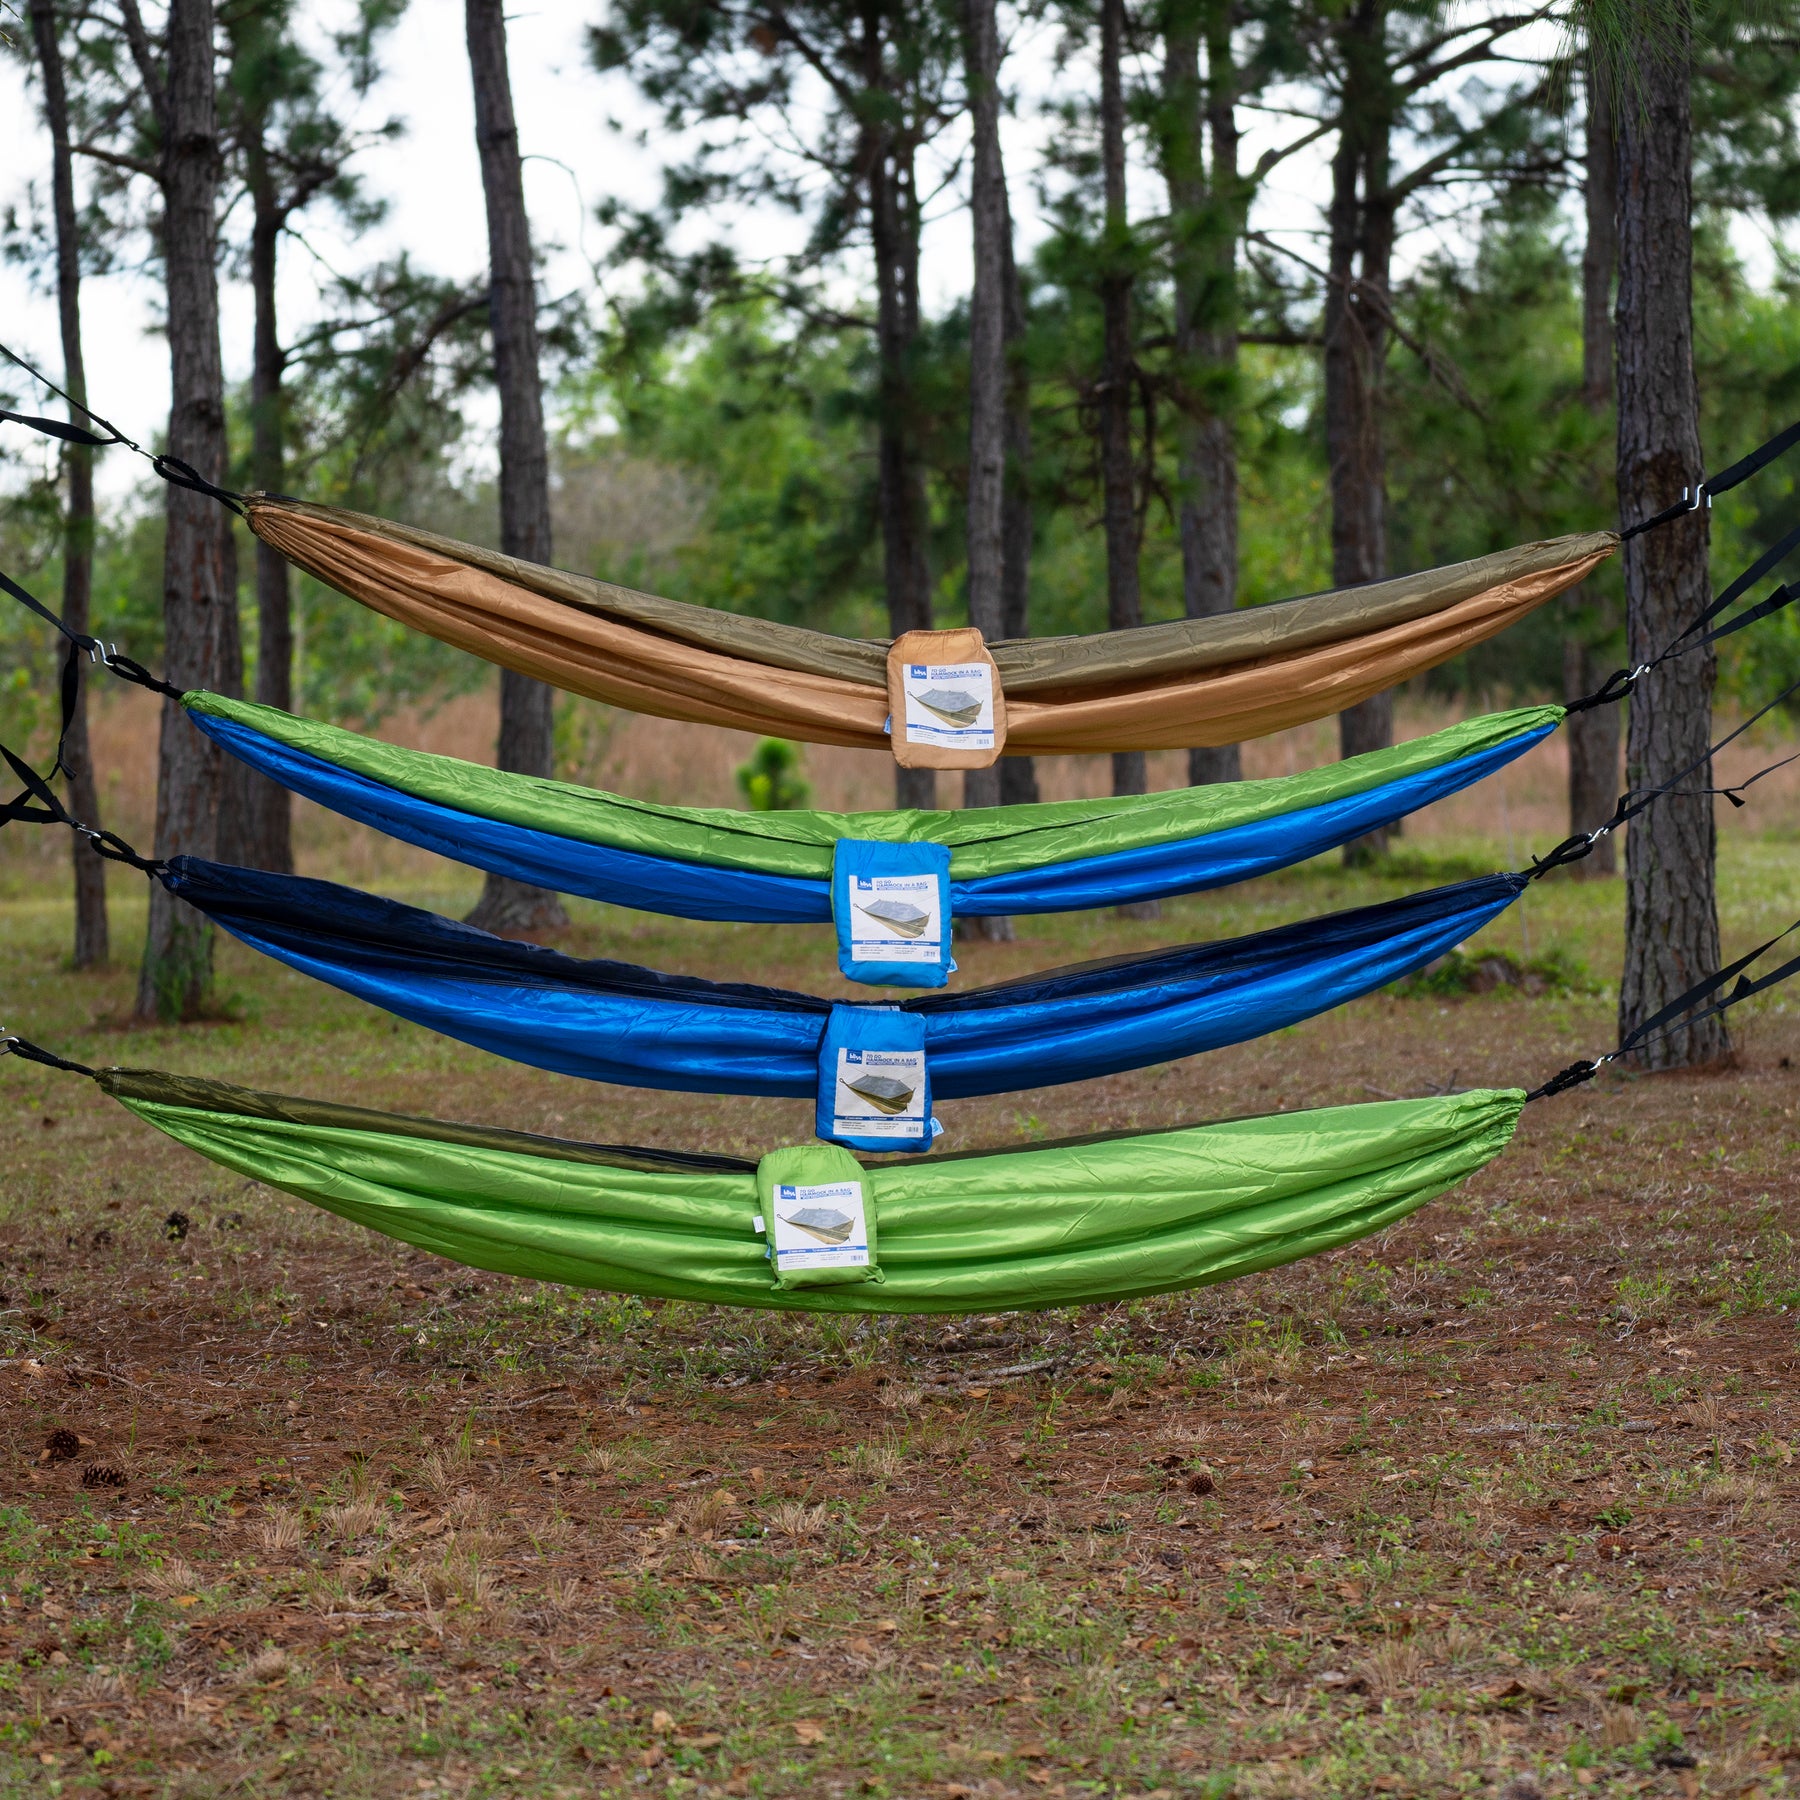 All four variations of the Bliss Hammocks 54-inch Wide Hammock in a Bag with mosquito net and tree straps hung between trees in the woods.